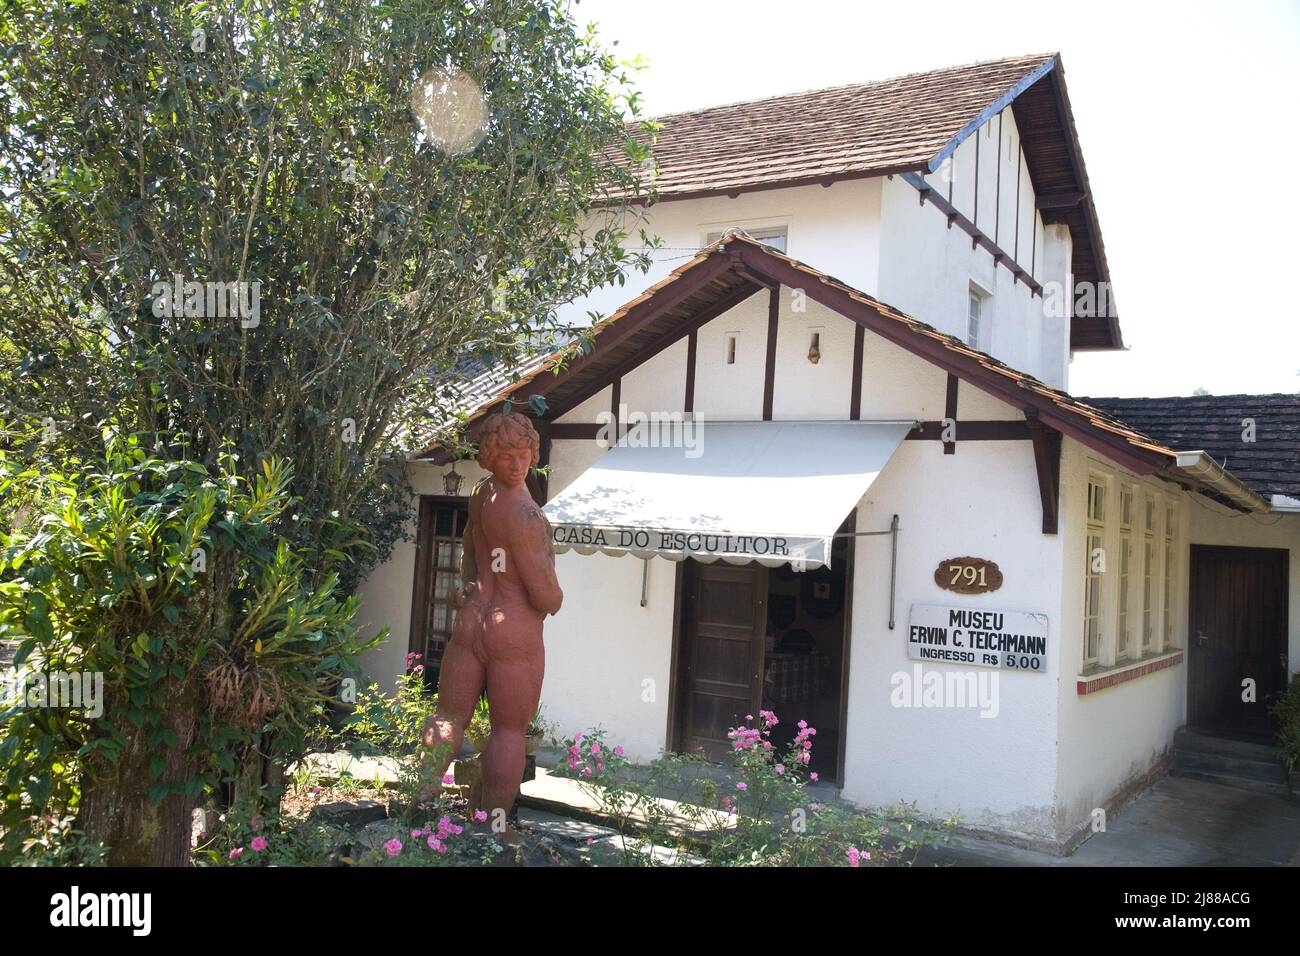 The sculpture museum of Ervin C. Teichman in the German community of Pomerode in Santa Catarina, Brazil Stock Photo